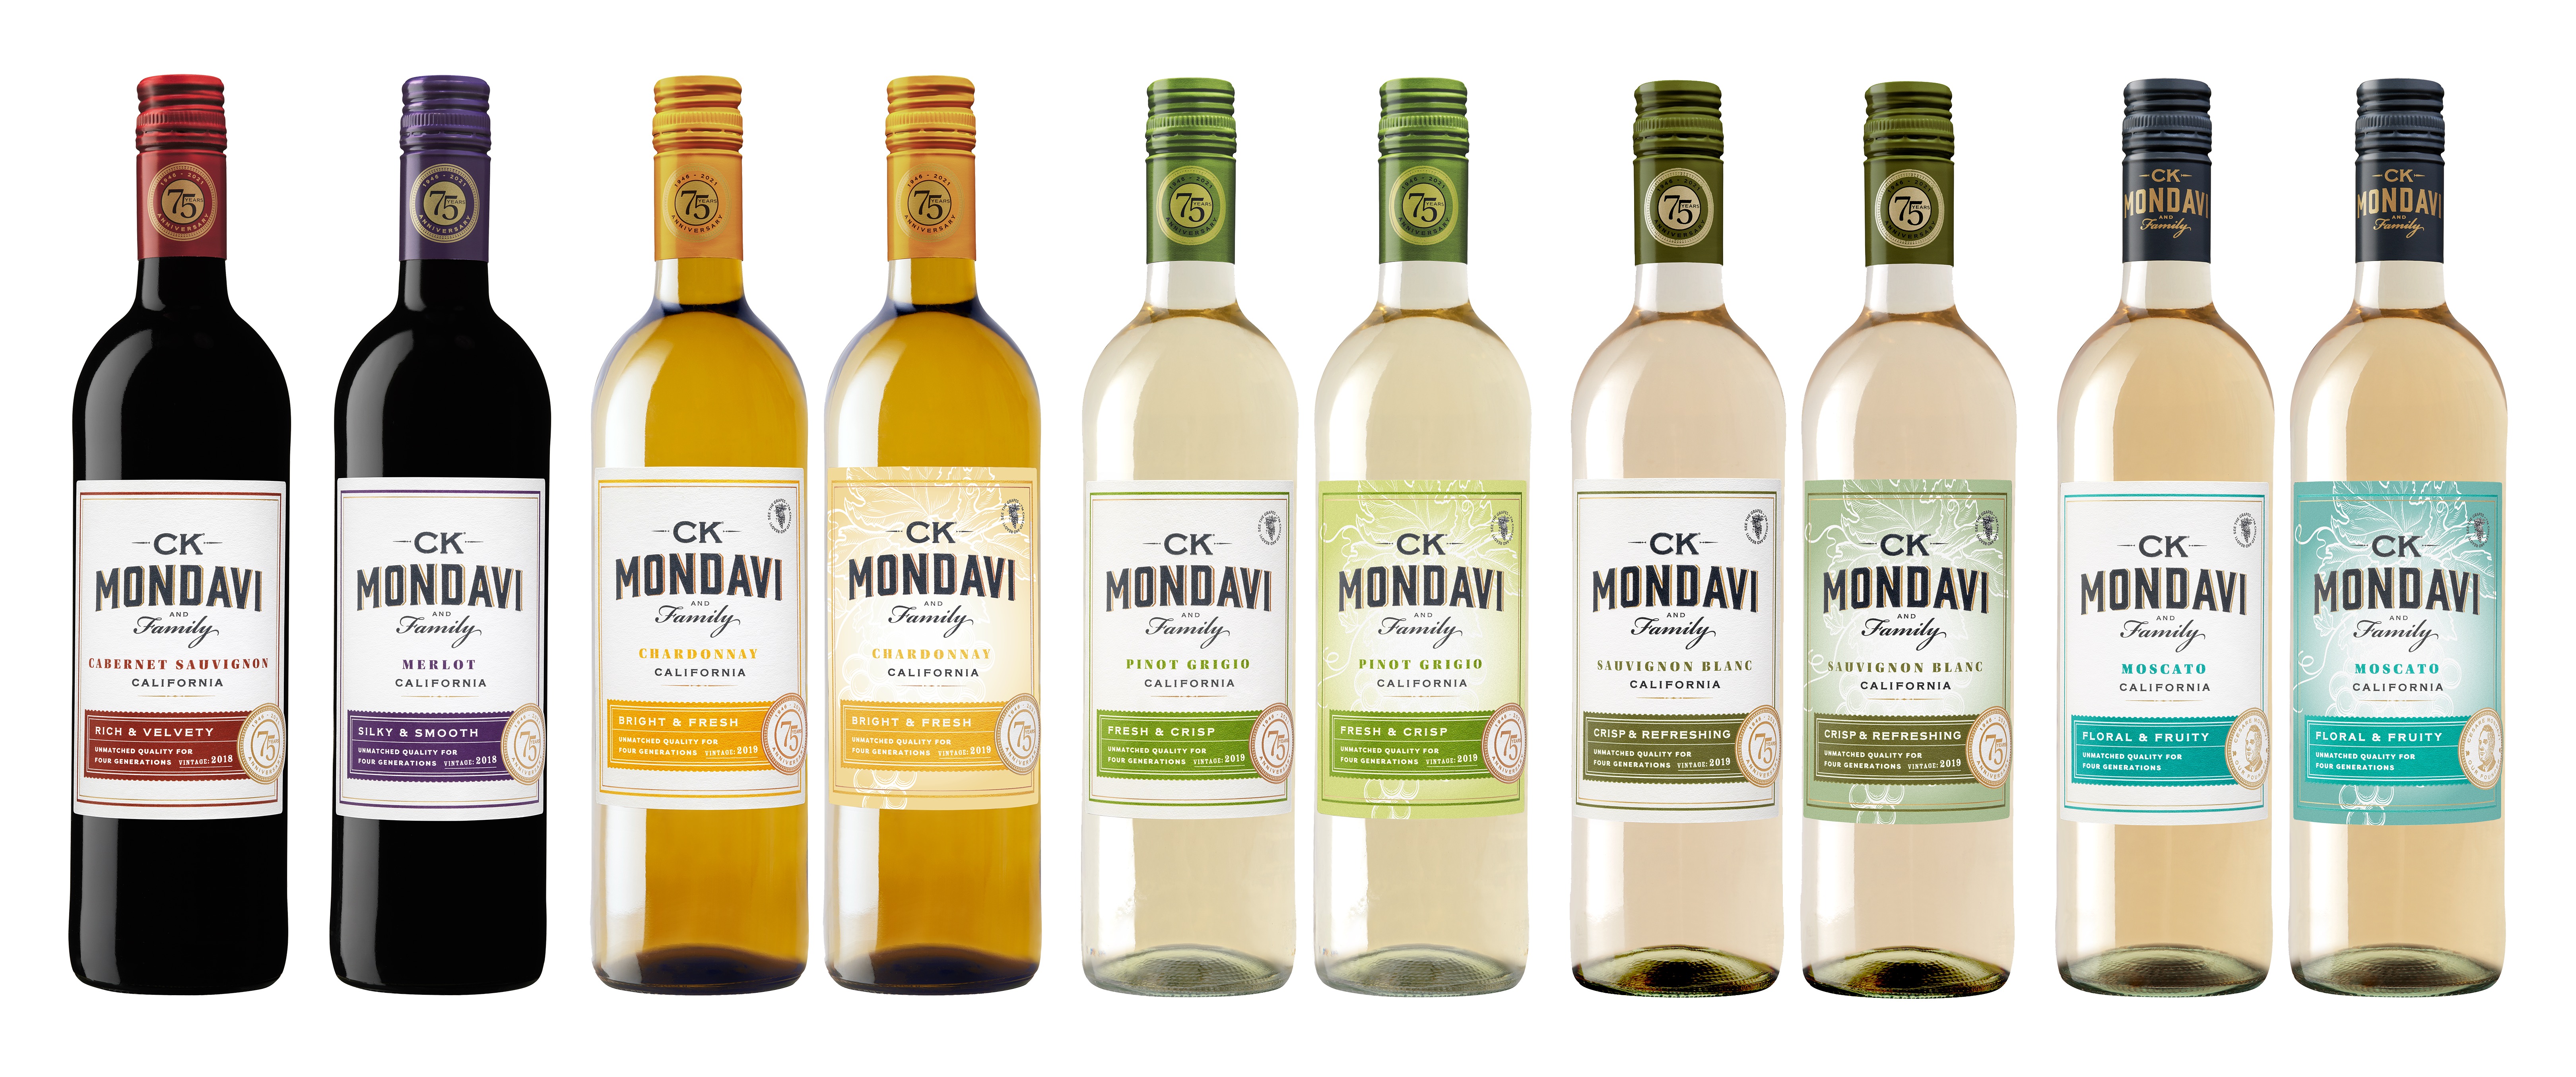 New thermochromic ink labels on the CK Mondavi and Family white wines transform from a light cream color at room temperature to bright, full color when properly chilled, at approximately 55 degrees Fahrenheit. 